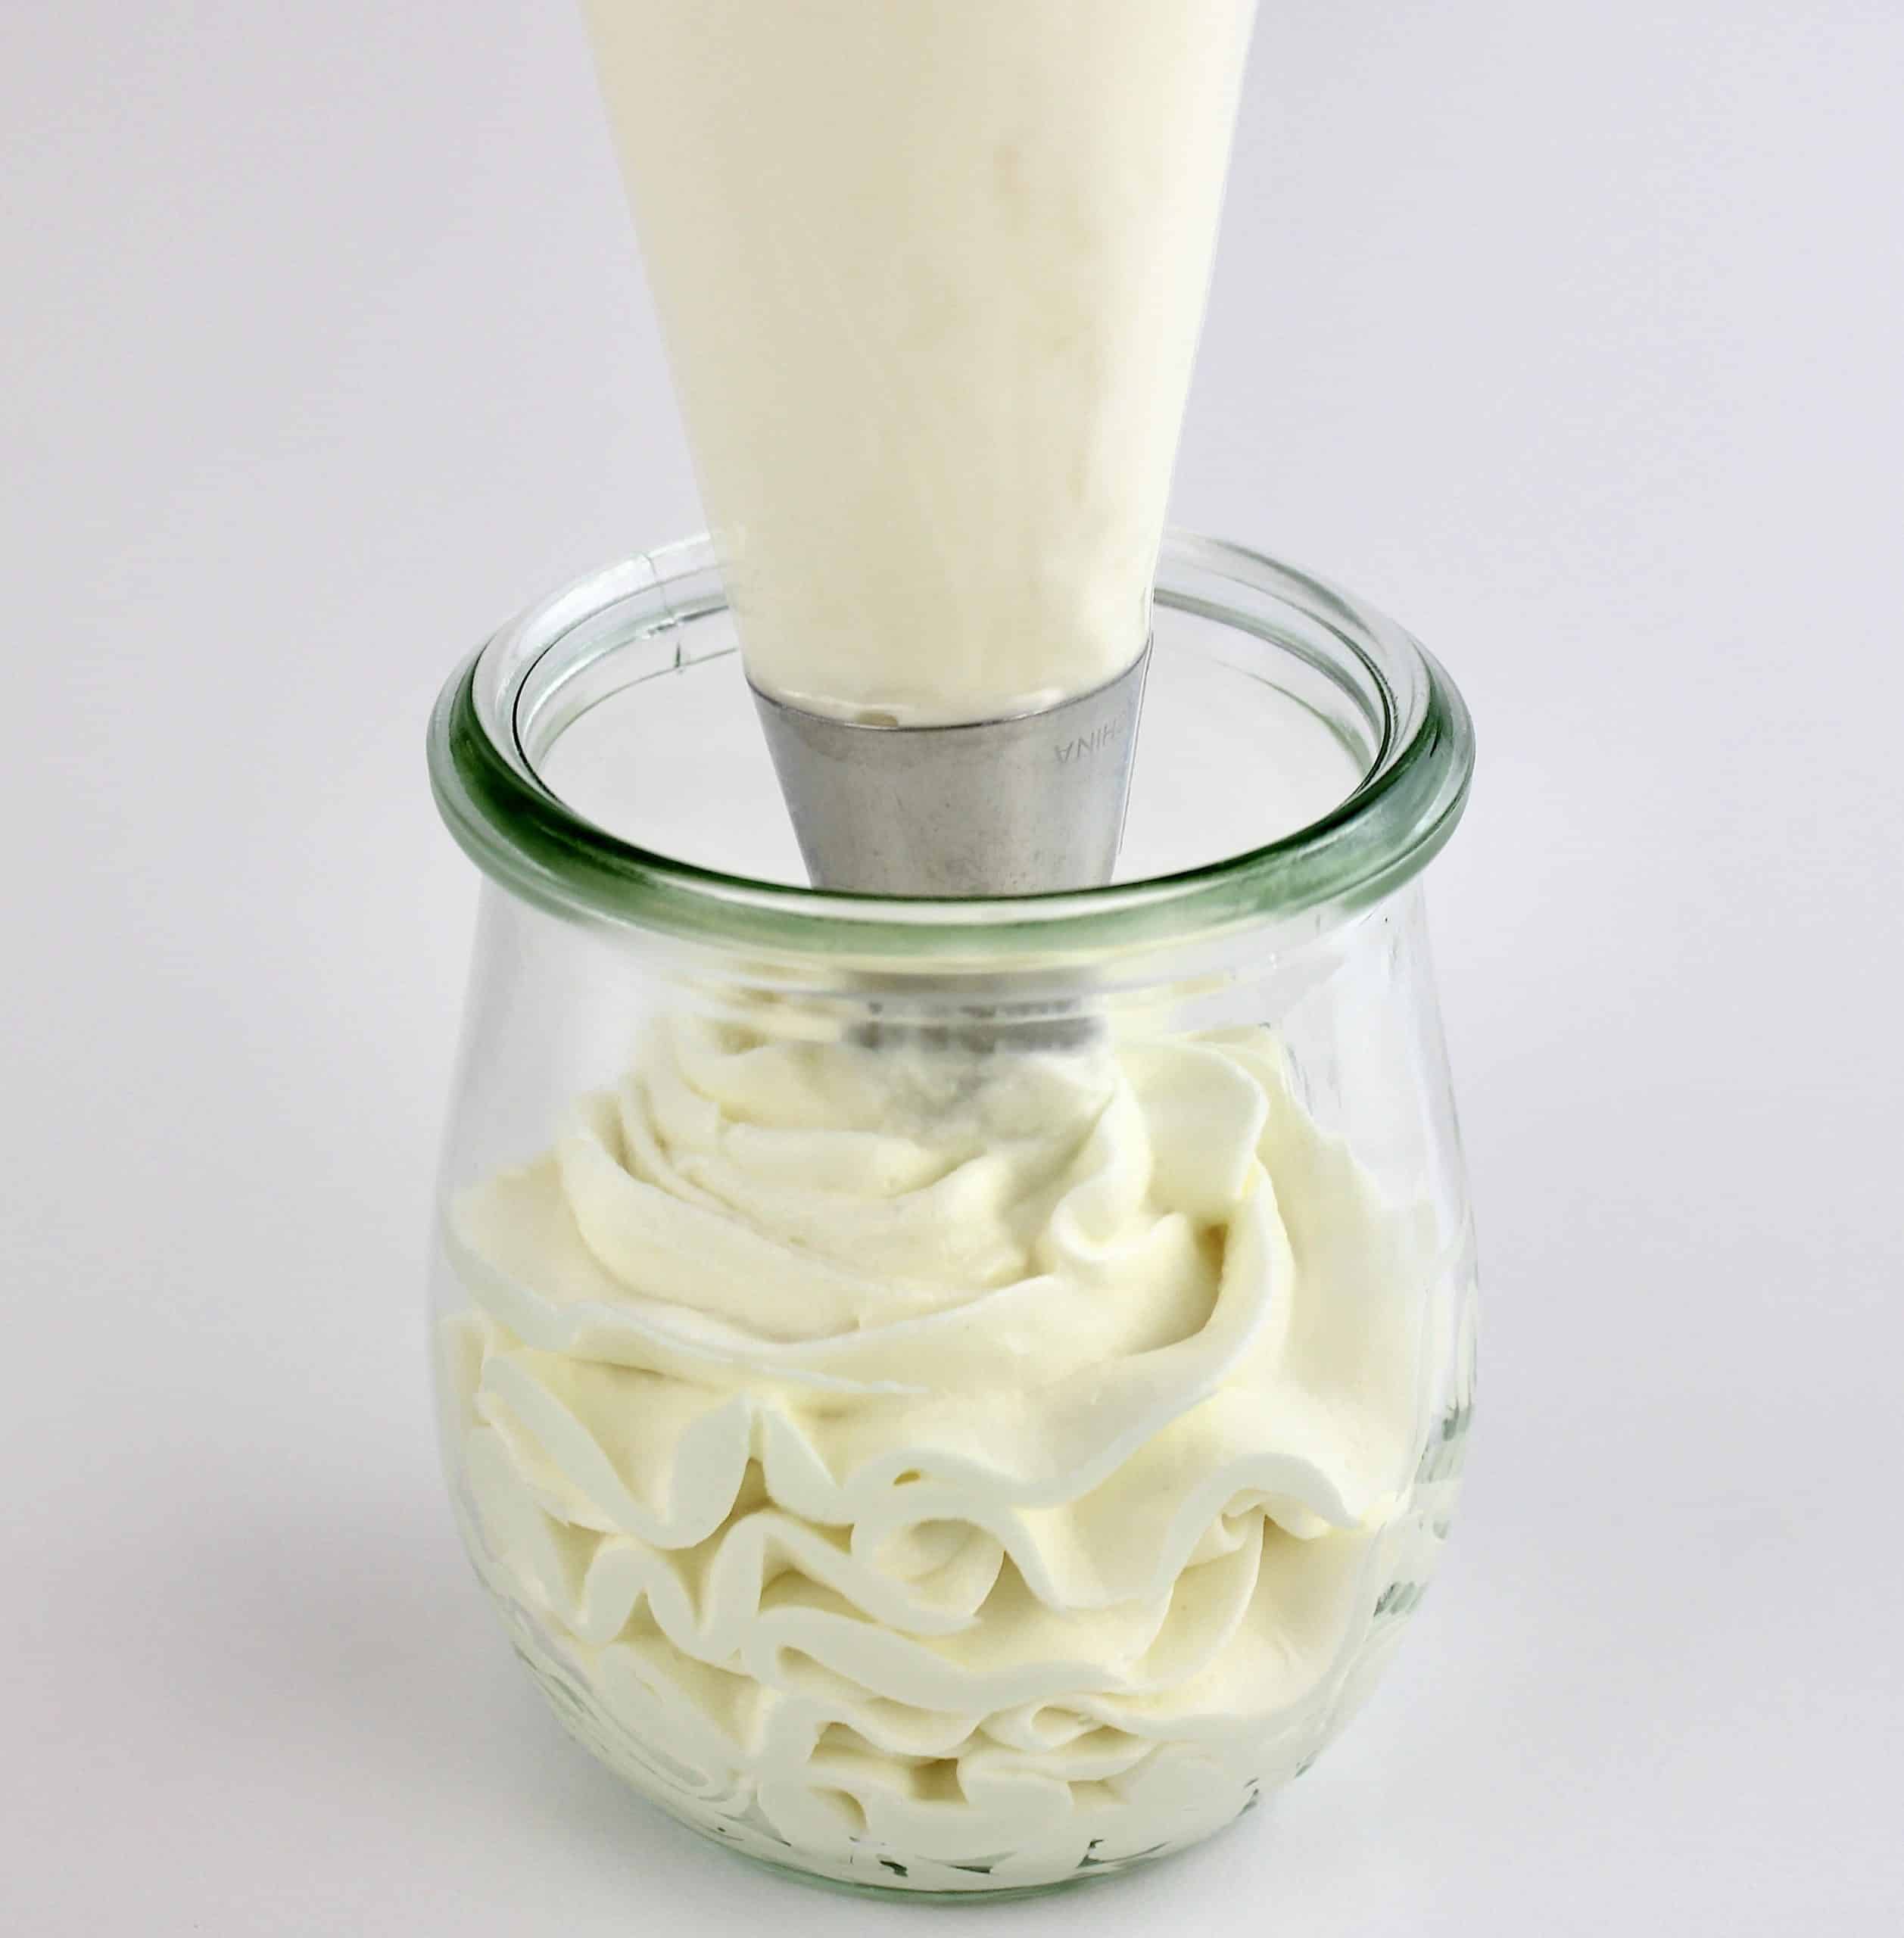 Keto Cheesecake Fluff being piped into glass jar